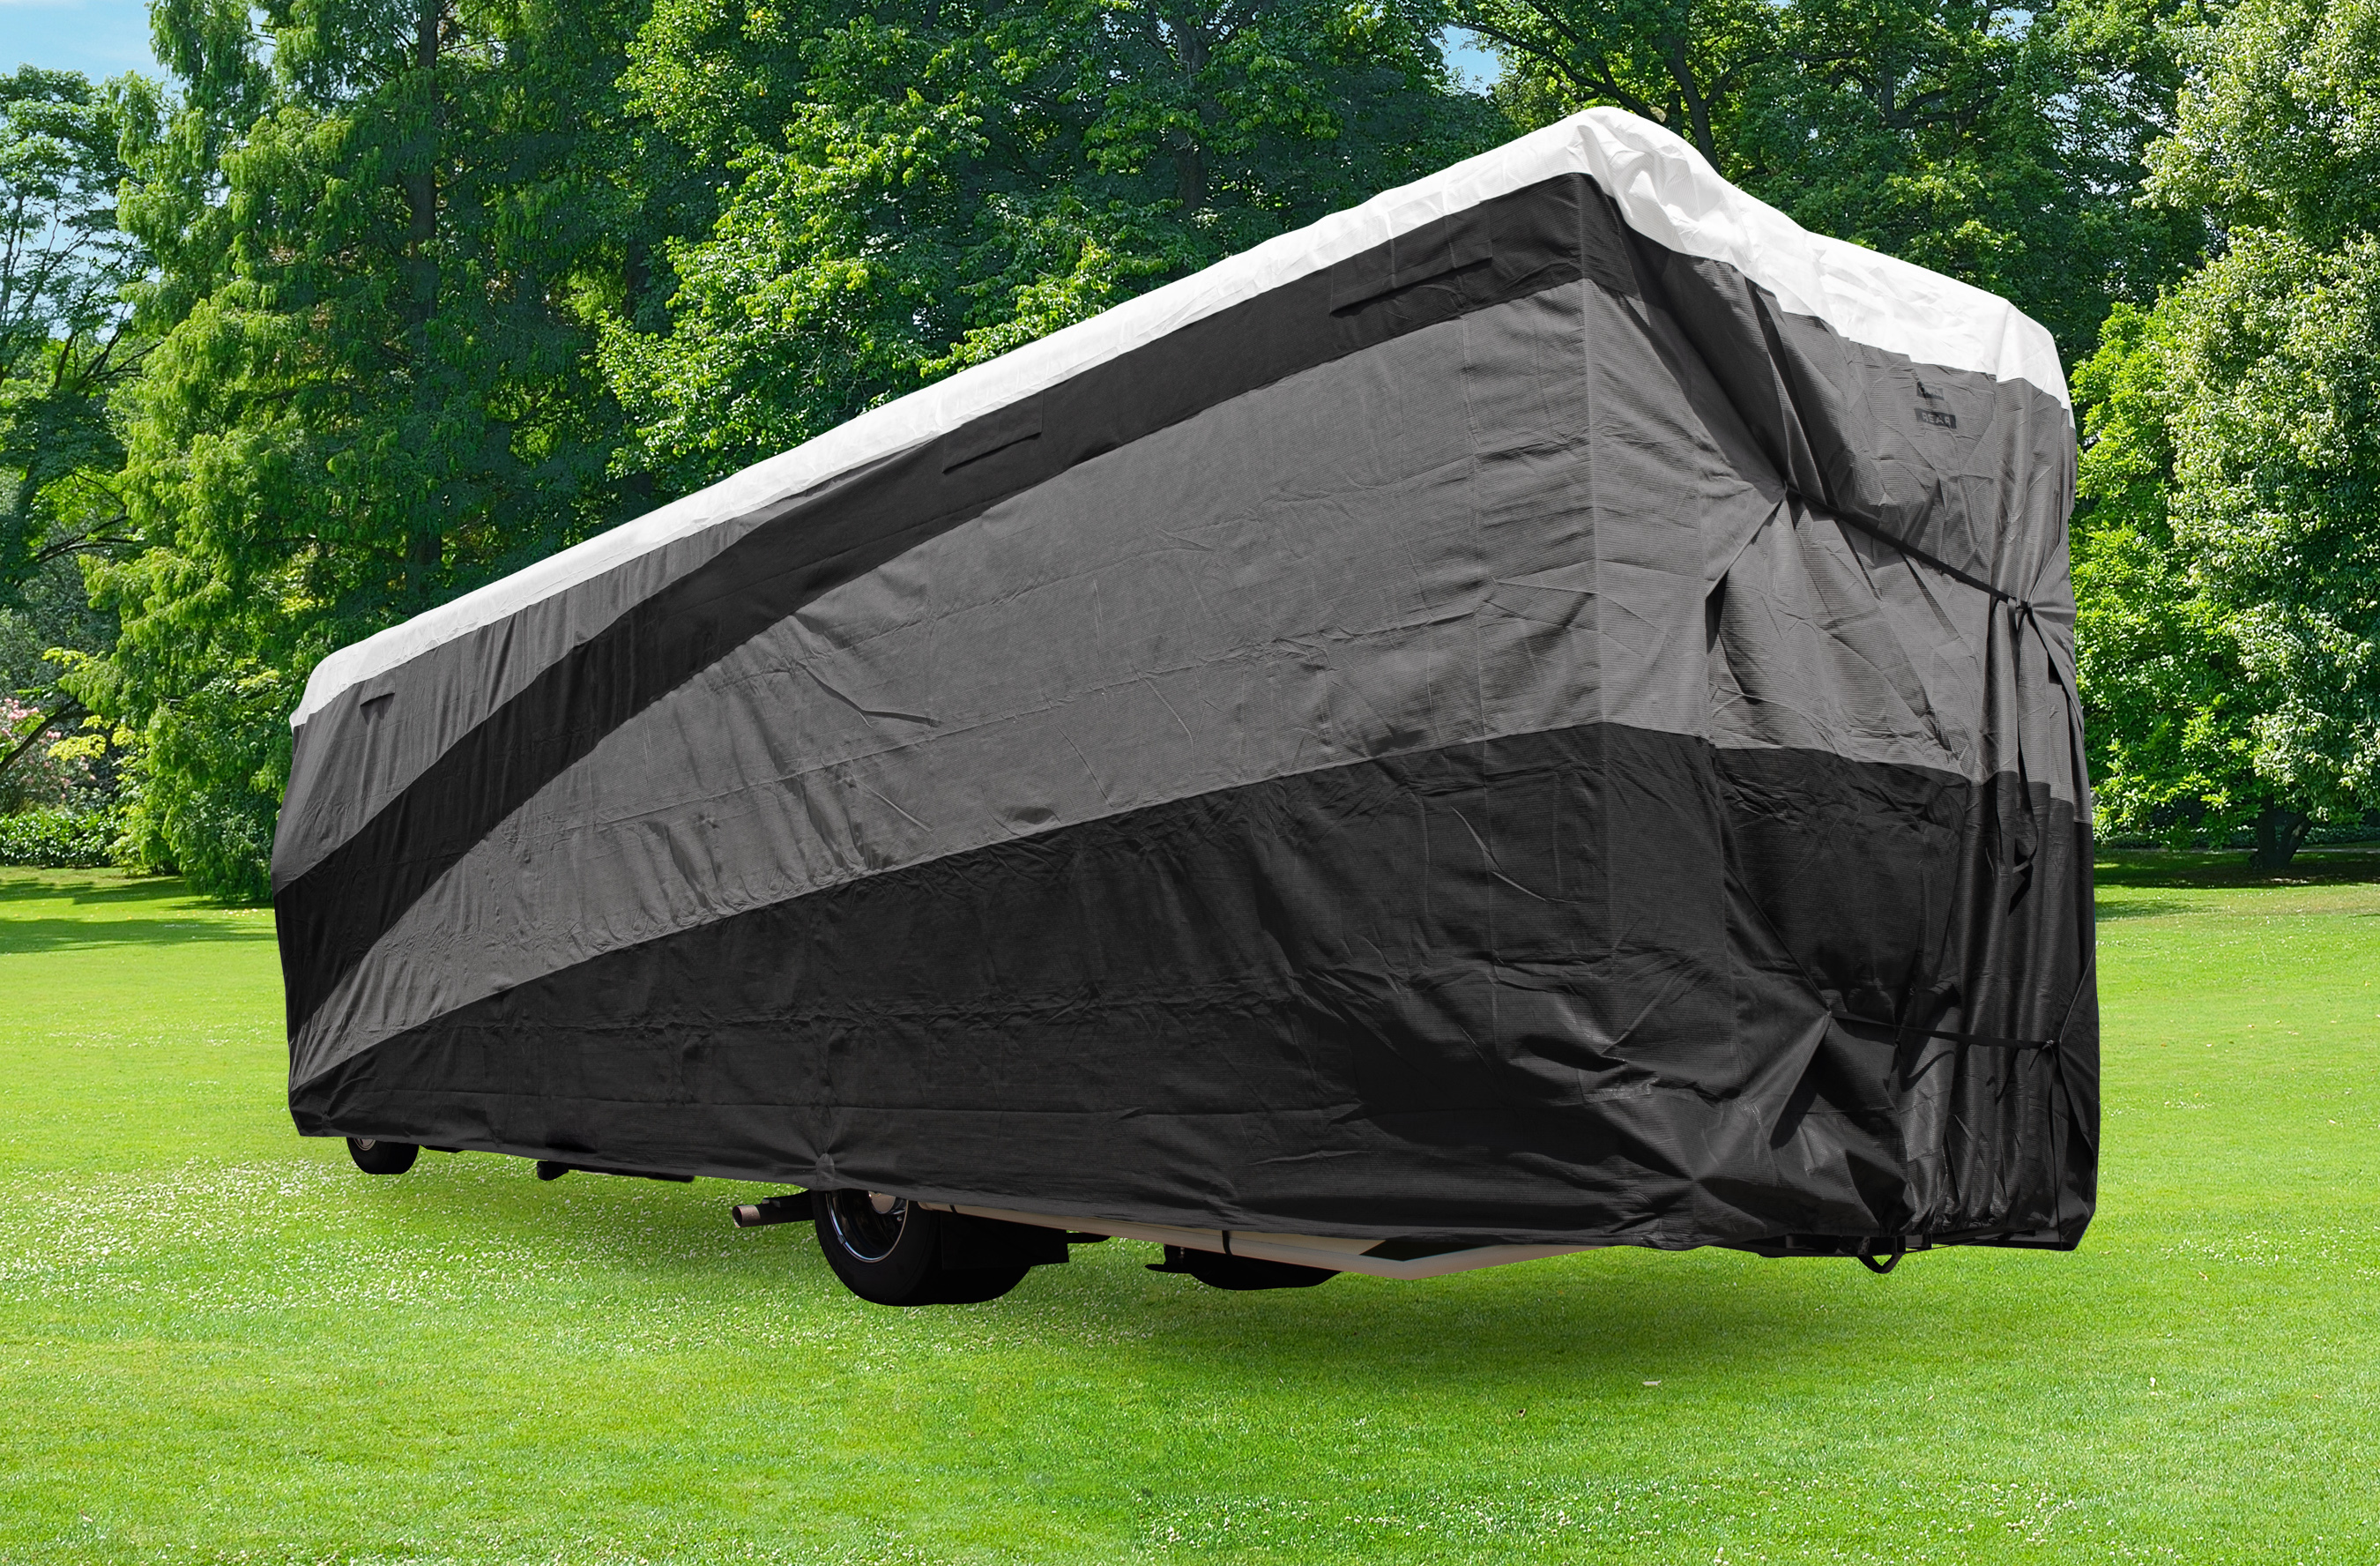 Camco ULTRAGuard Supreme RV Cover Fits Class A RVs 34 to 37-Feet  Extremely Durable Design Weatherproof with a Dupont Tyvek Top (56106) 